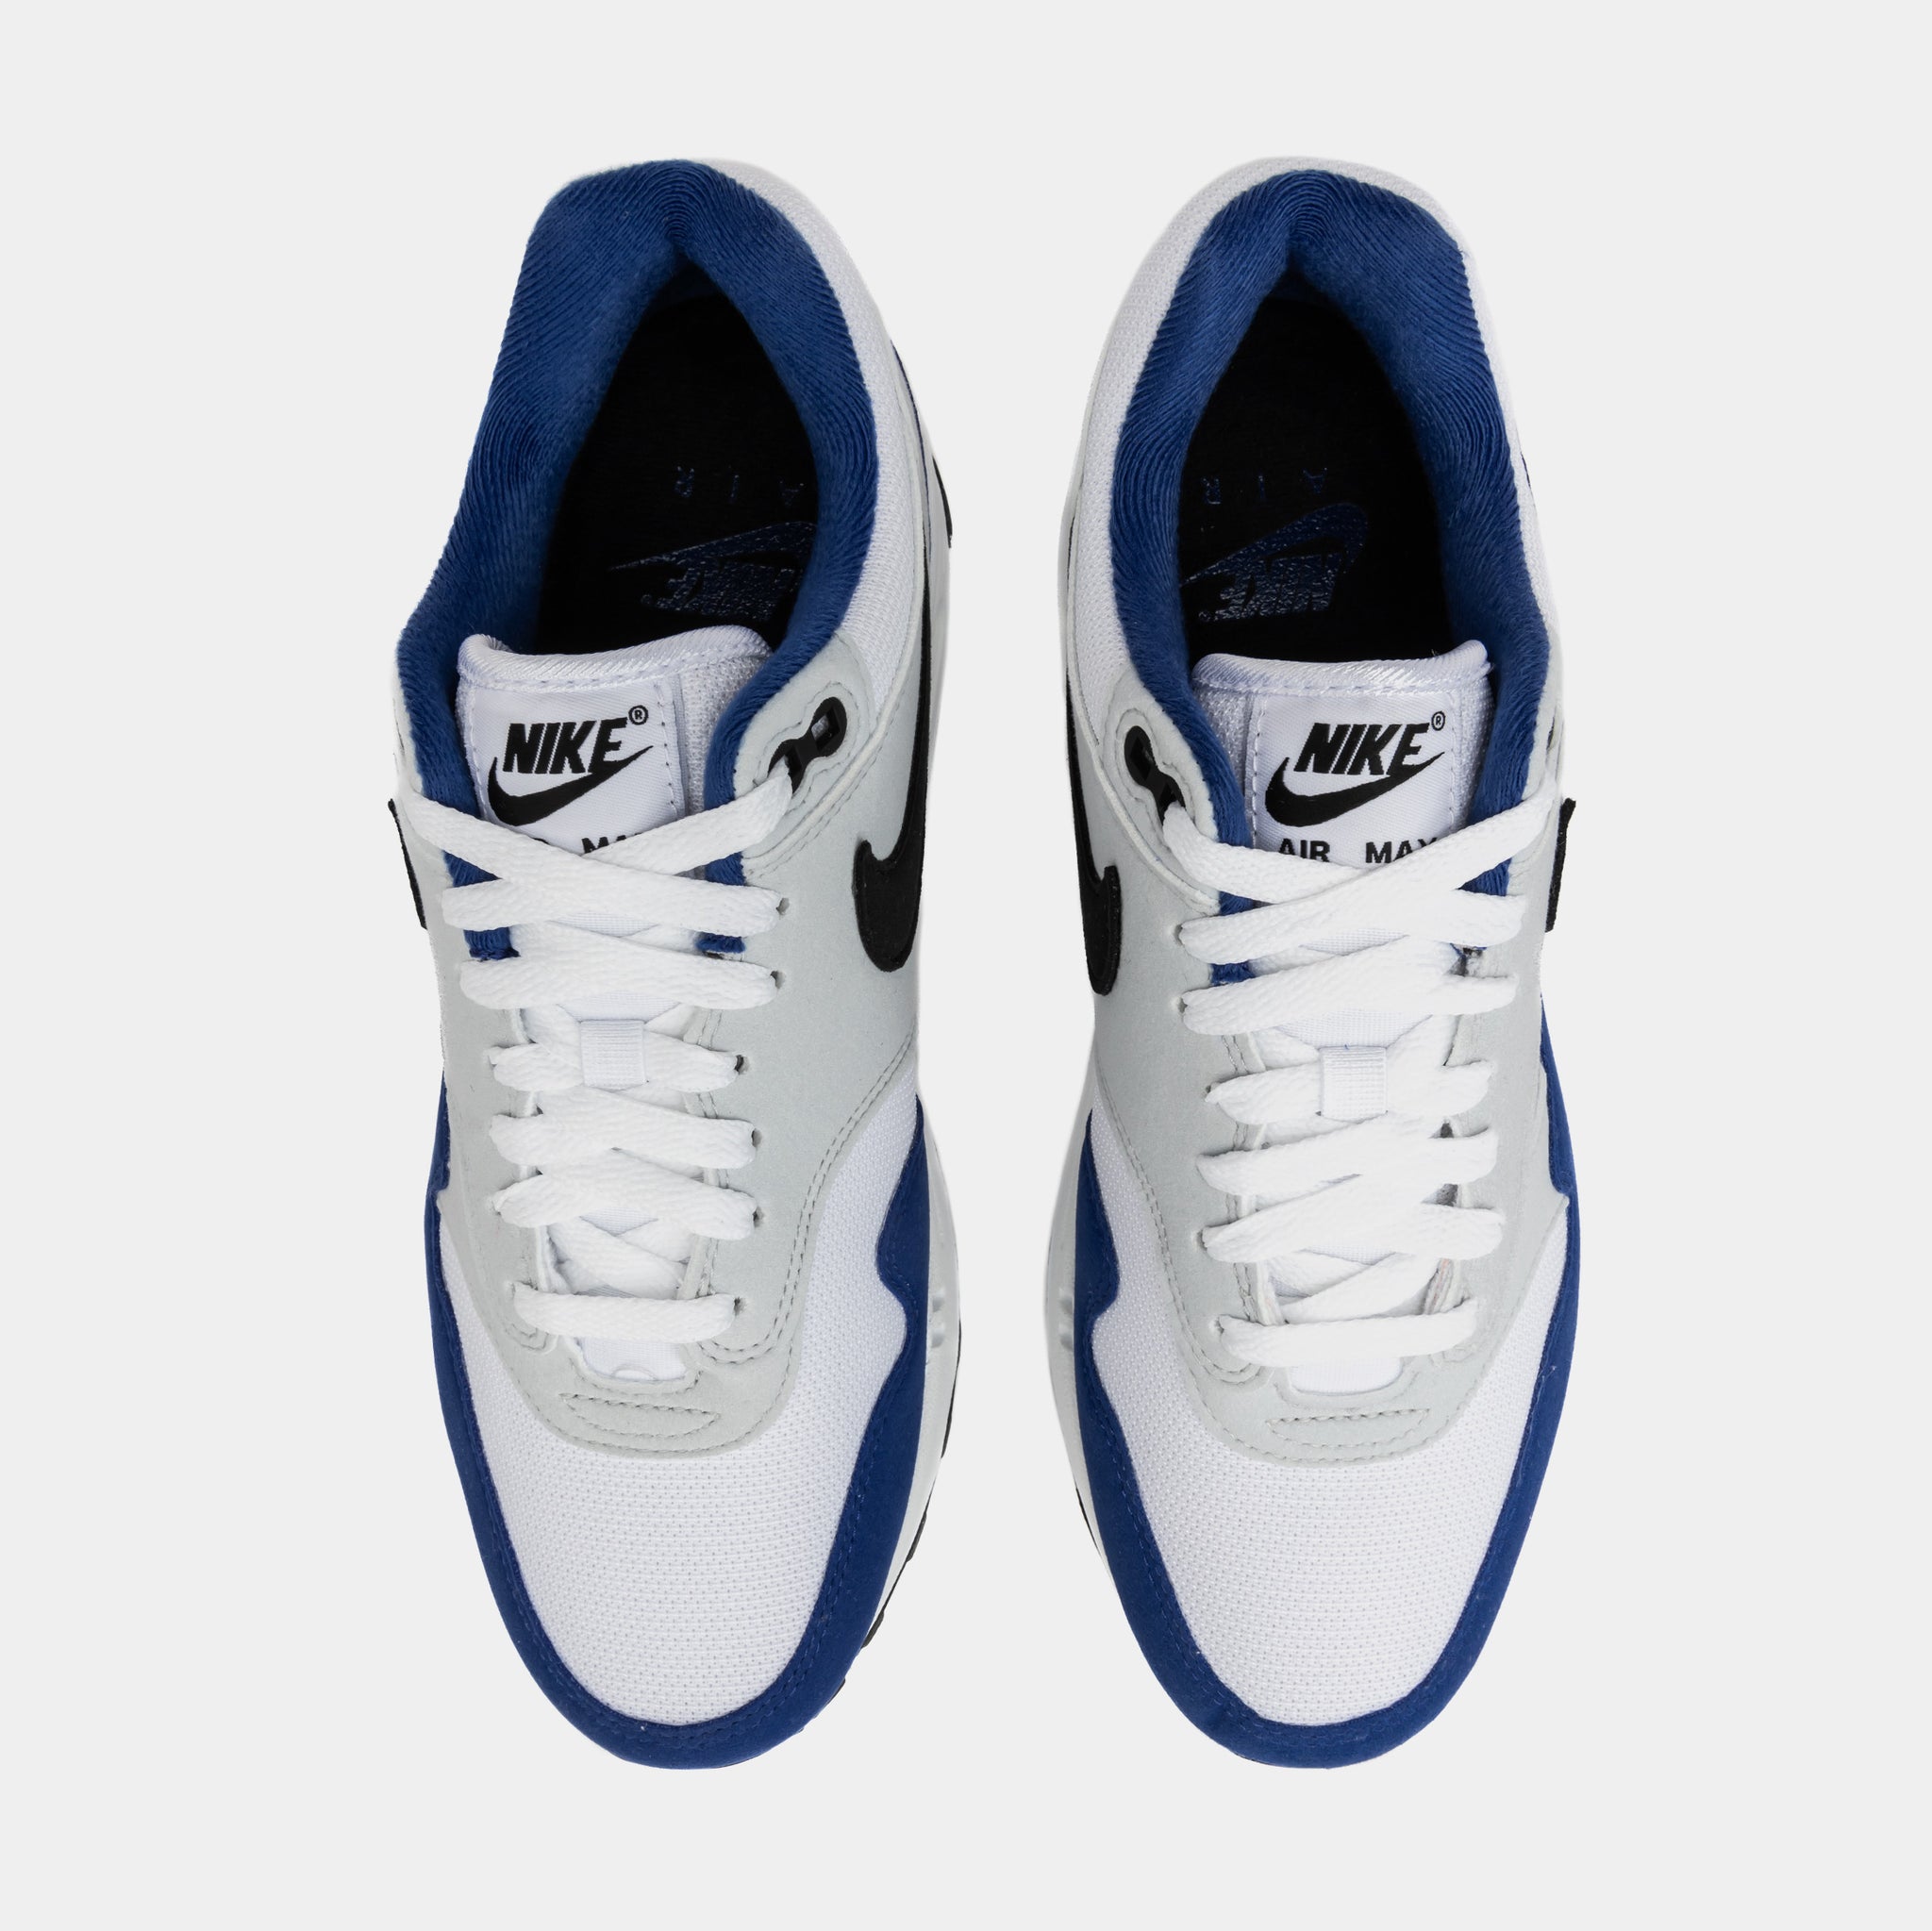 Nike Air Max 1 Deep Royal Blue White Men's Size Shoes Sneakers FD9082 100  NEW